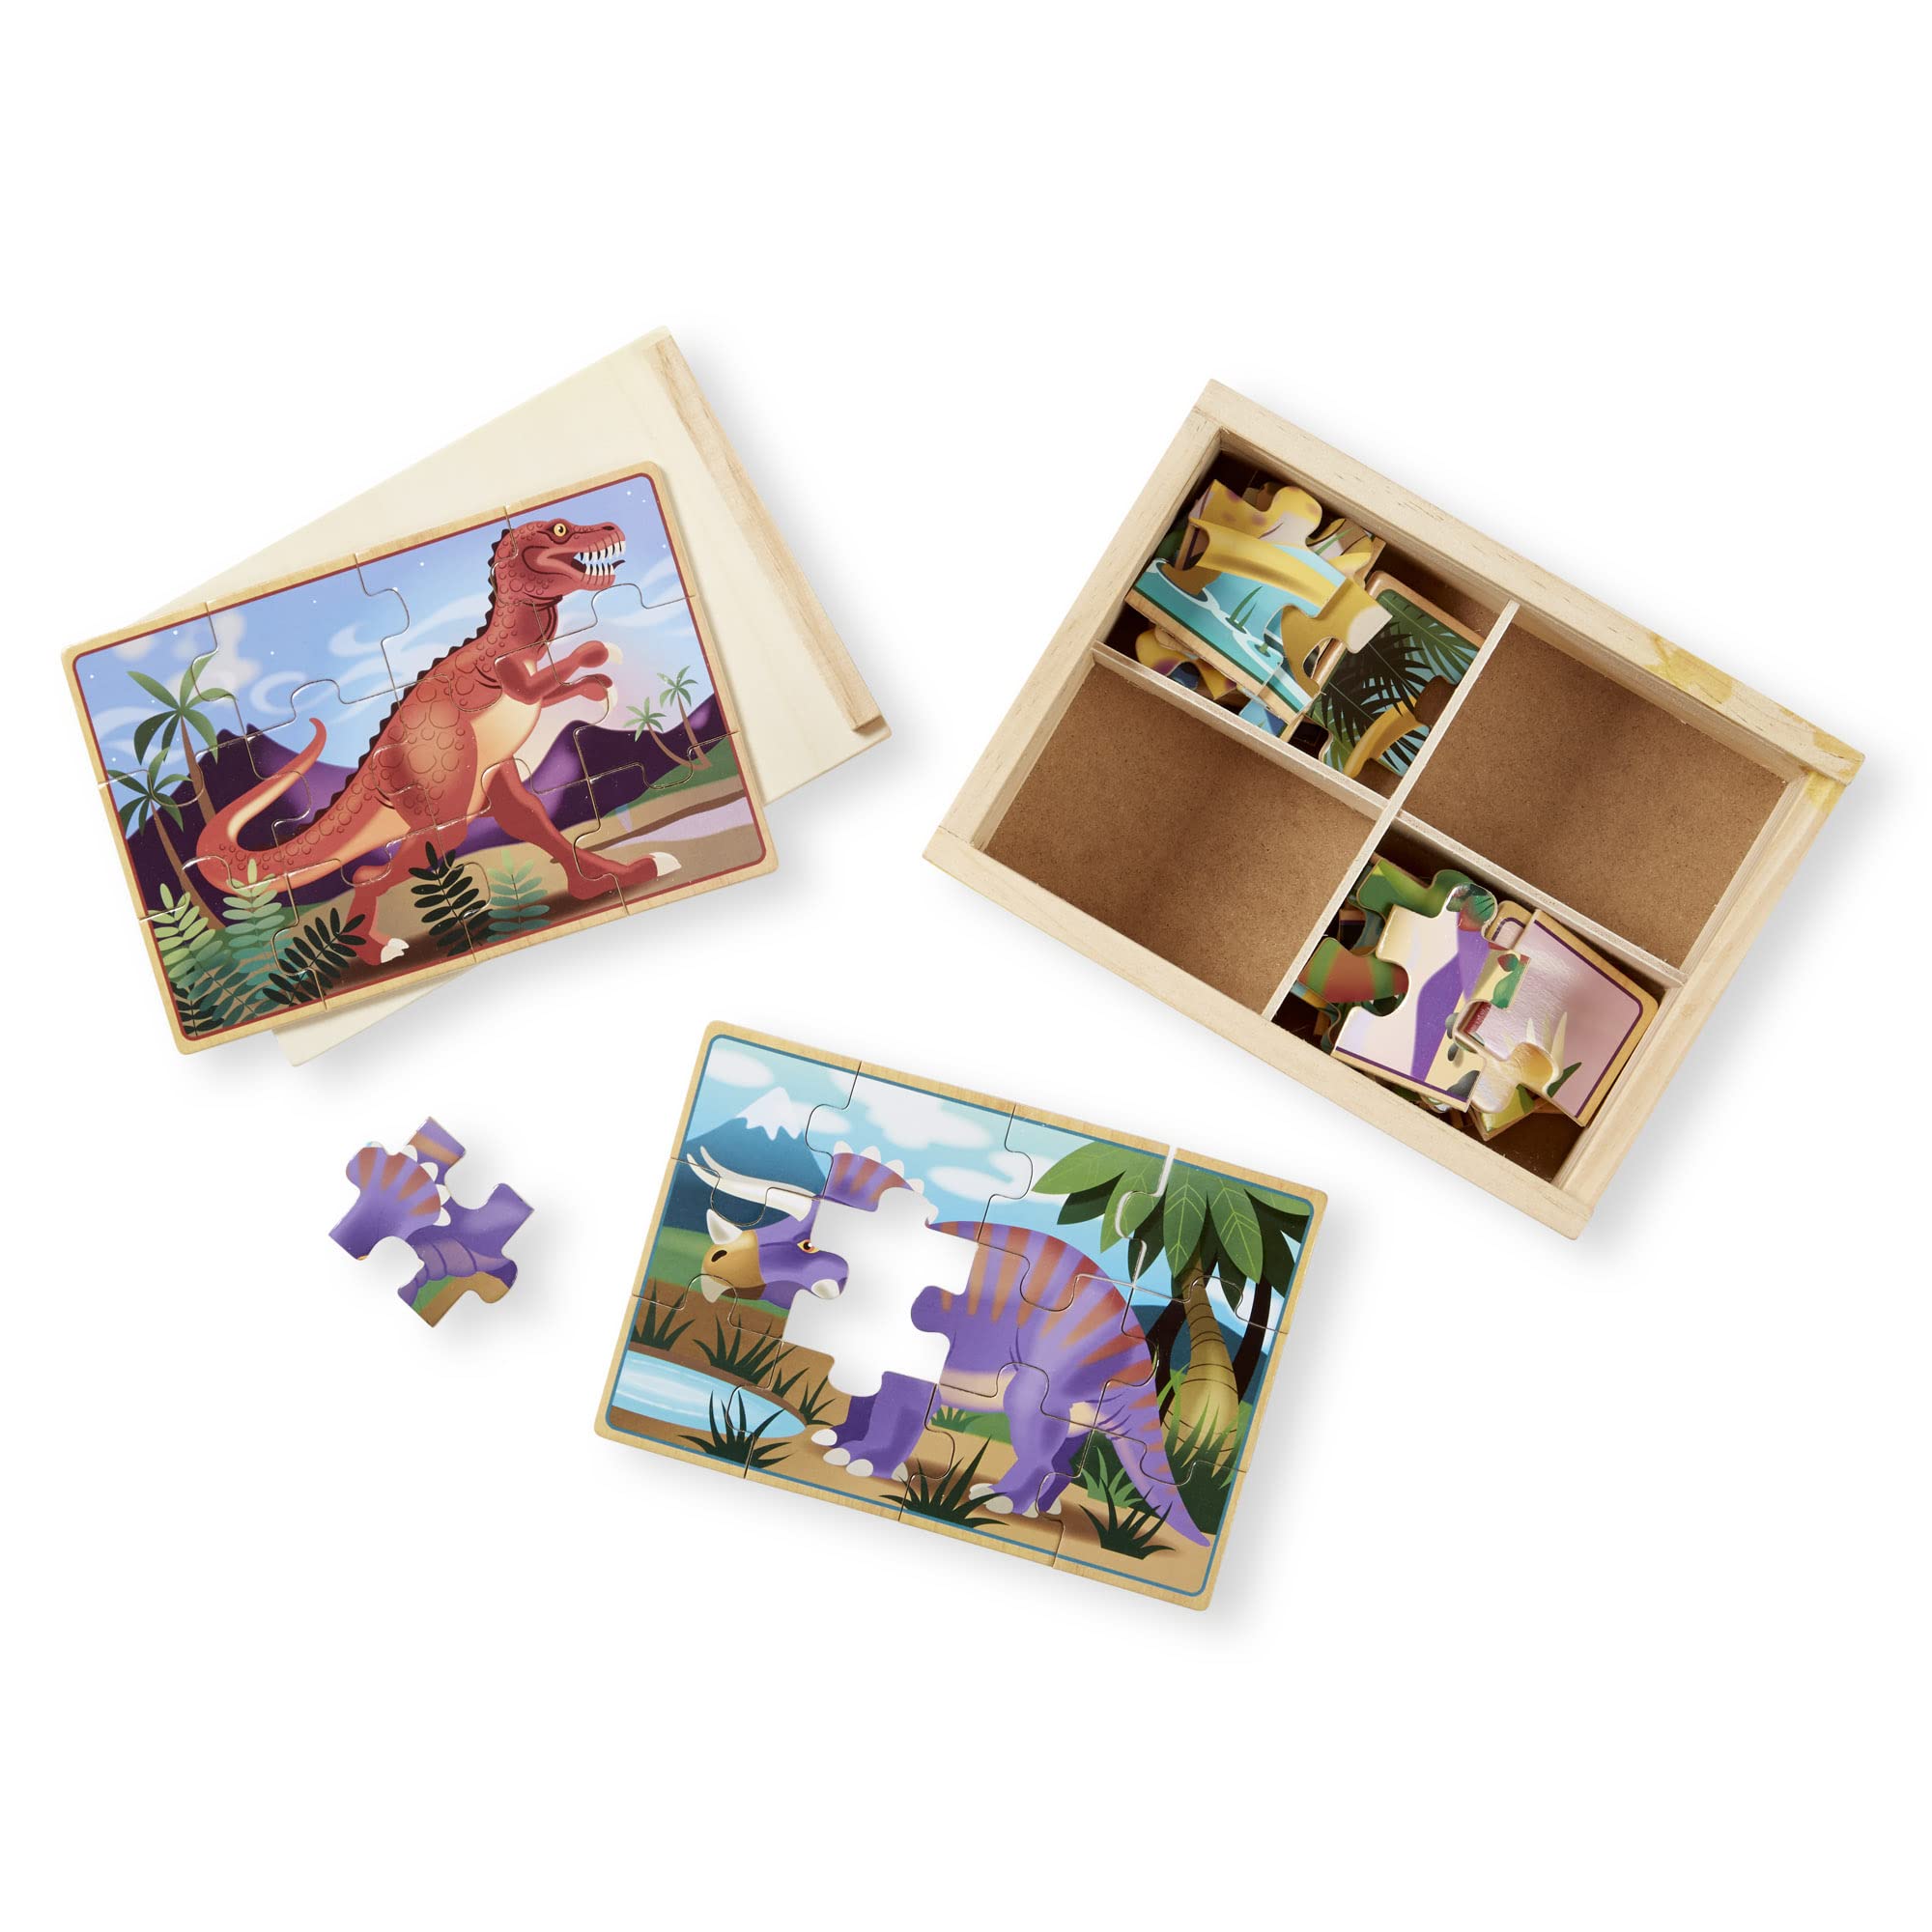 Book Cover Melissa & Doug Dinosaurs 4-in-1 Wooden Jigsaw Puzzles in a Storage Box (48 pcs) - Kids Puzzle, Dinosaur Puzzles for Kids Ages 3+ - FSC-Certified Materials